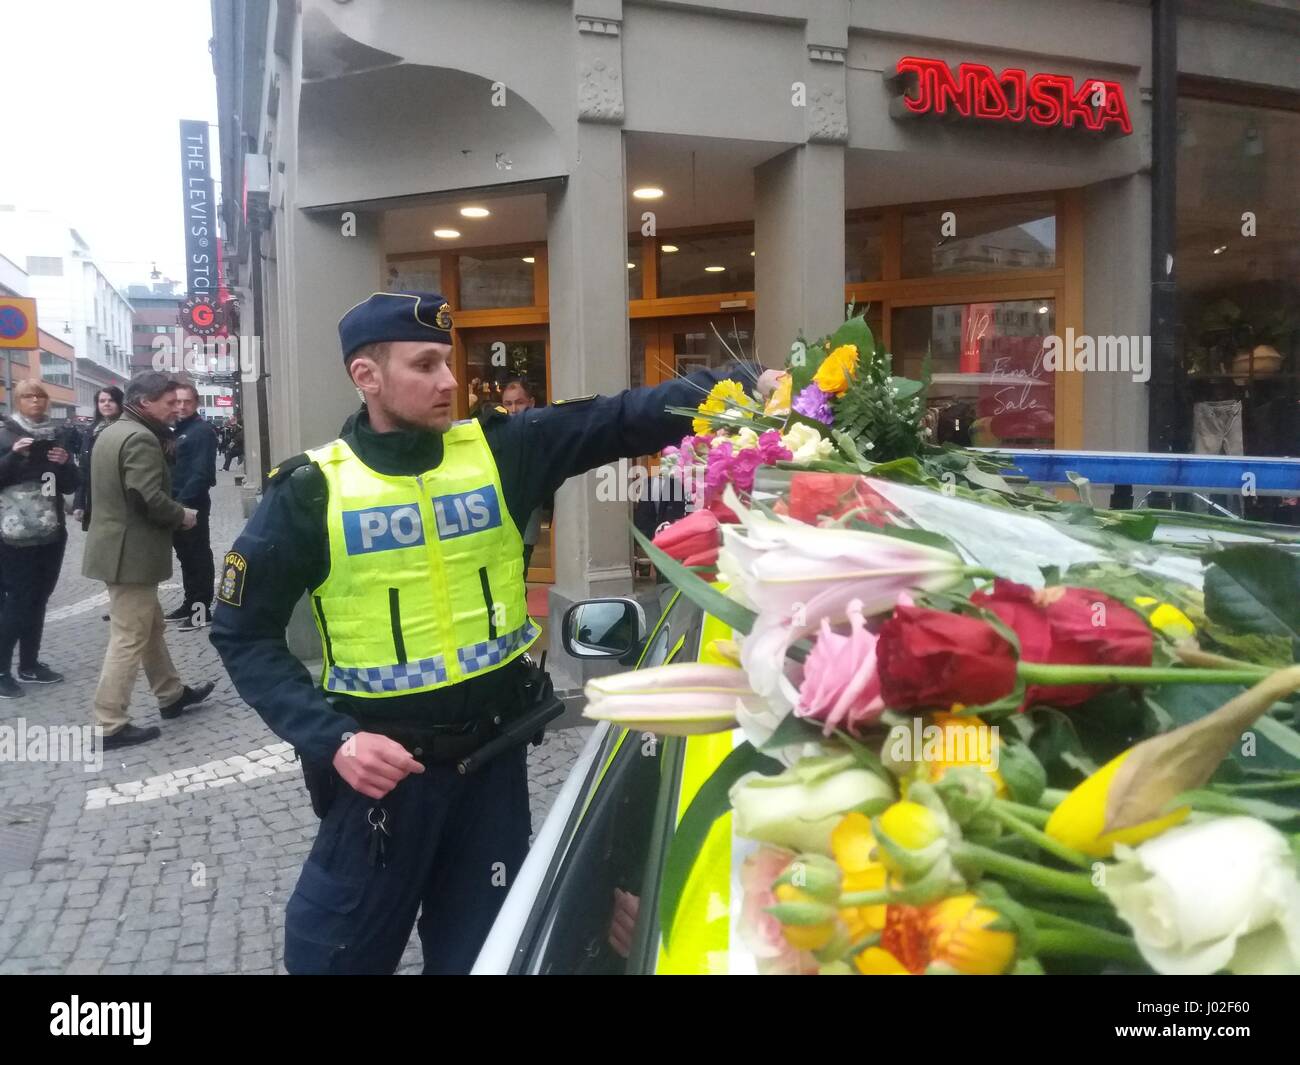 Swedish Polis police officer deposits a flower bouquet on the parked police car roof, given to him by a citizen, in sympathy to the victiims of the terrorist truck attack in the center of Stockholm's Ahlens mall, now being cordoned off due to police investigations in the crime scenes. Stock Photo